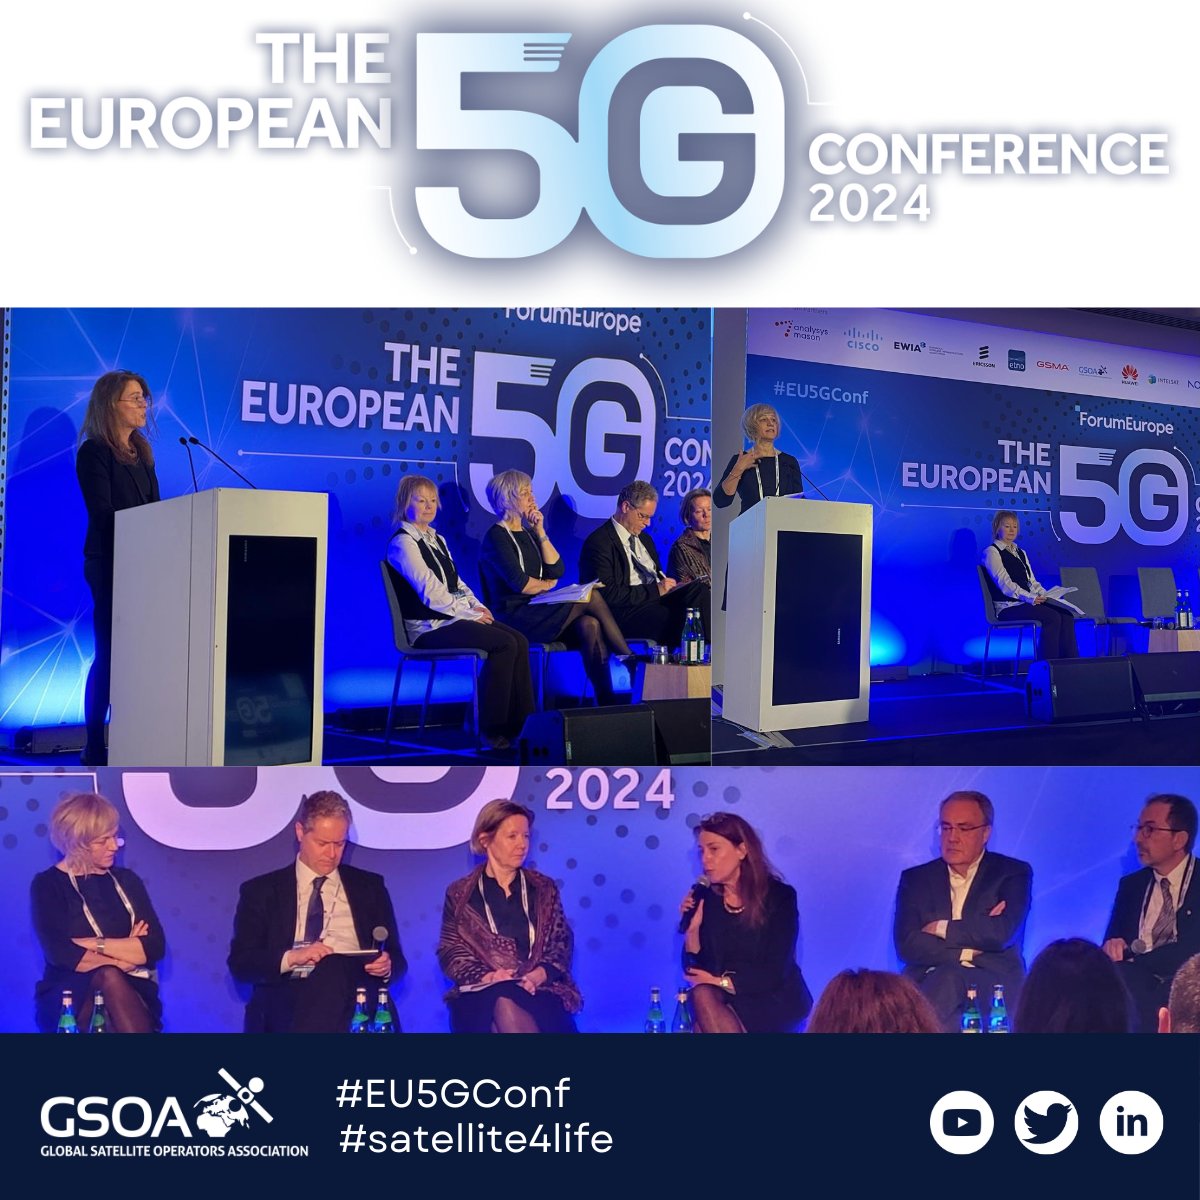 For a successful deployment of 5G & 6G, Digital strategies need to acknowledge and embrace all technologies and recognize satellite as a holistic part of the ecosystems to support the achievement of the European digital targets.
#EU5GConf #satellite4life #satellite #5G #6G